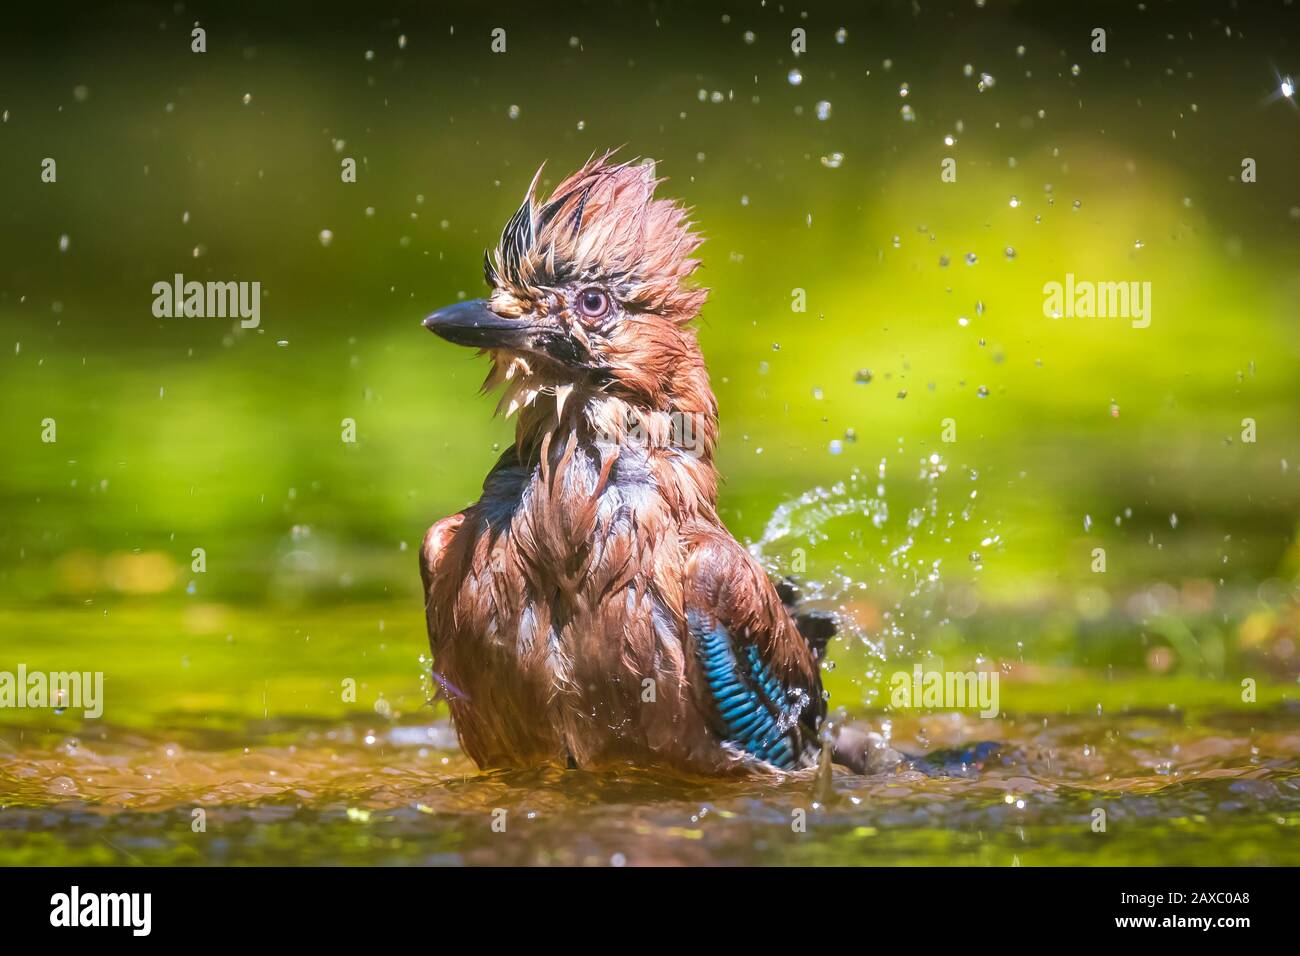 Closeup of a wet Eurasian jay bird Garrulus glandarius washing, preening and cleaning in water. Selective focus and low poit of view Stock Photo